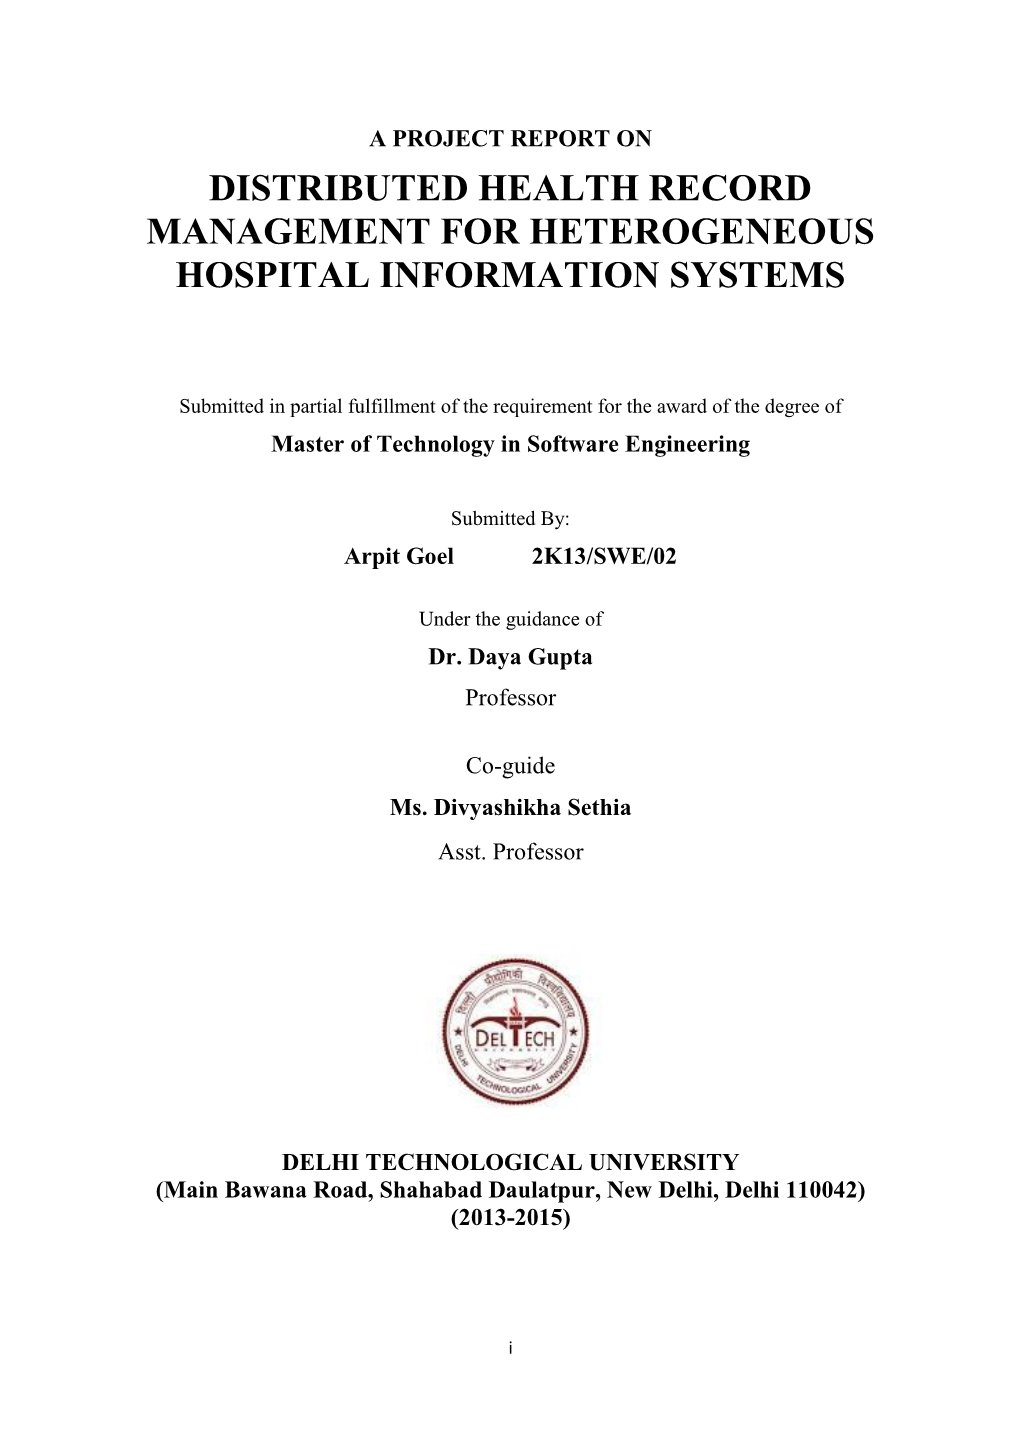 Distributed Health Record Management for Heterogeneous Hospital Information Systems